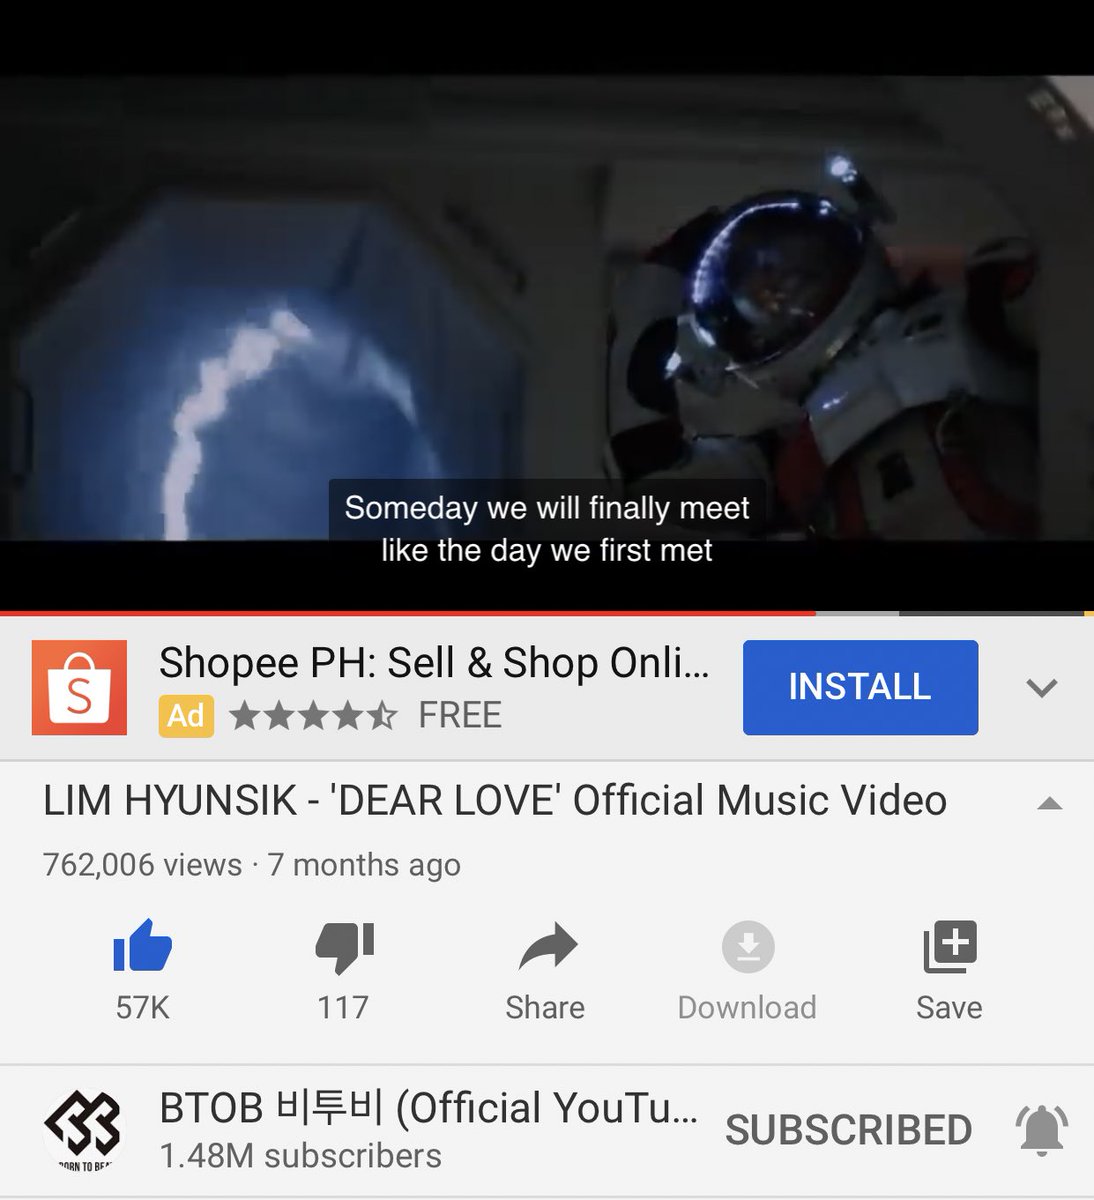 Dear Love view count streaming thread 19MAY2020 3:50PM KST762,006